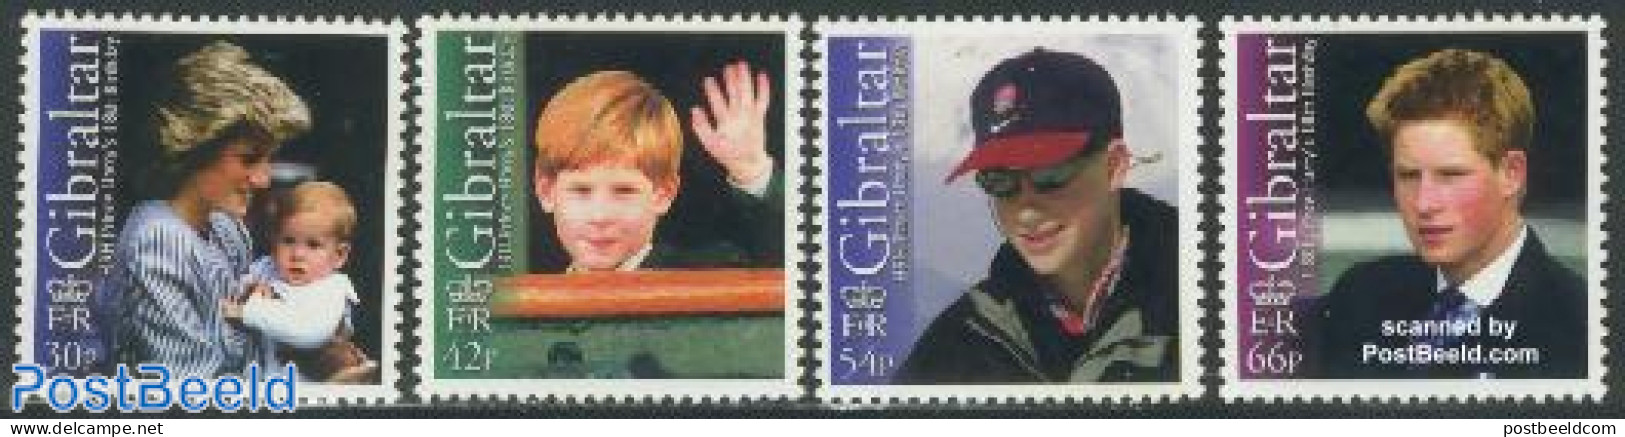 Gibraltar 2002 Prince Harry 18th Birthday 4v, Mint NH, History - Kings & Queens (Royalty) - Royalties, Royals